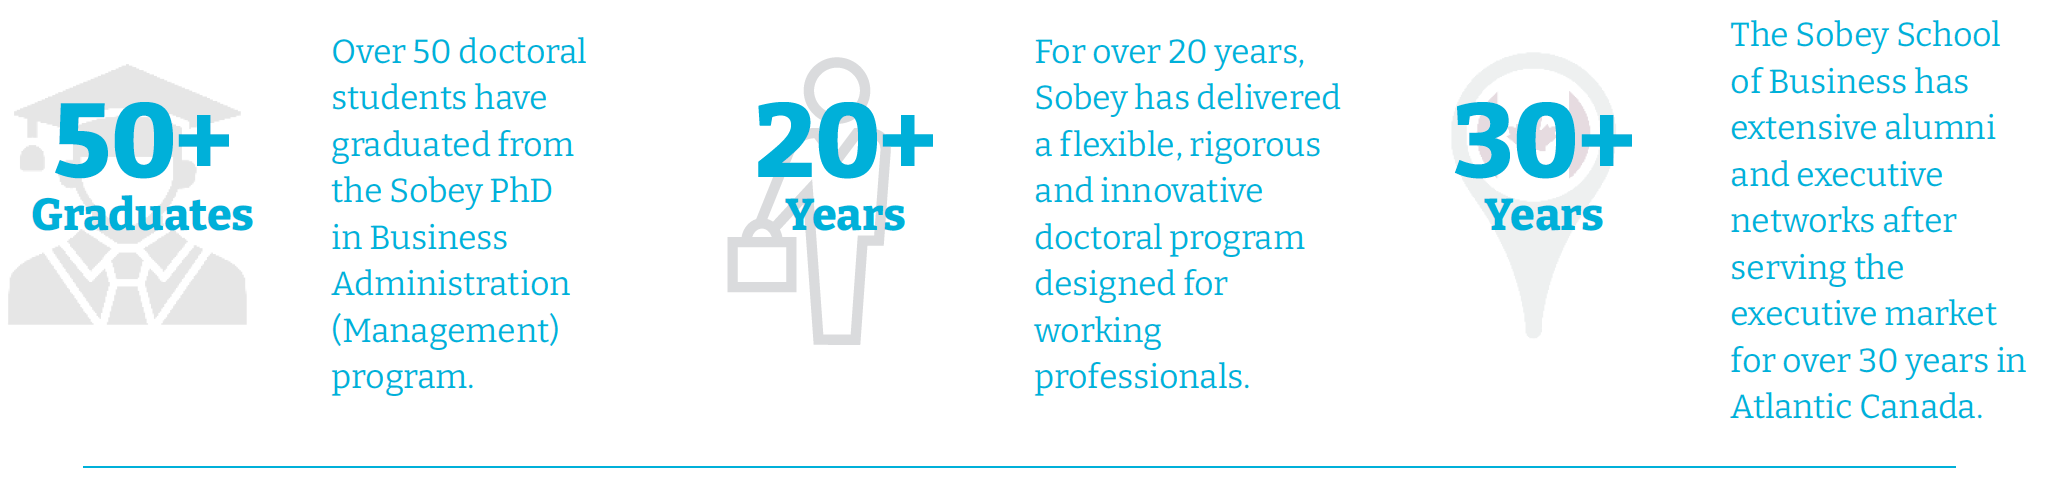 Over 50 doctoral students have graduated from the Sobey PhD in Business Administration (Management) program. For over 20 years, Sobey has delivered a flexible, rigorous and innovative doctoral program designed for working professionals. The Sobey School of Business has extensive alumni and executive networks after serving the executive market for over 30 years in Atlantic Canada.